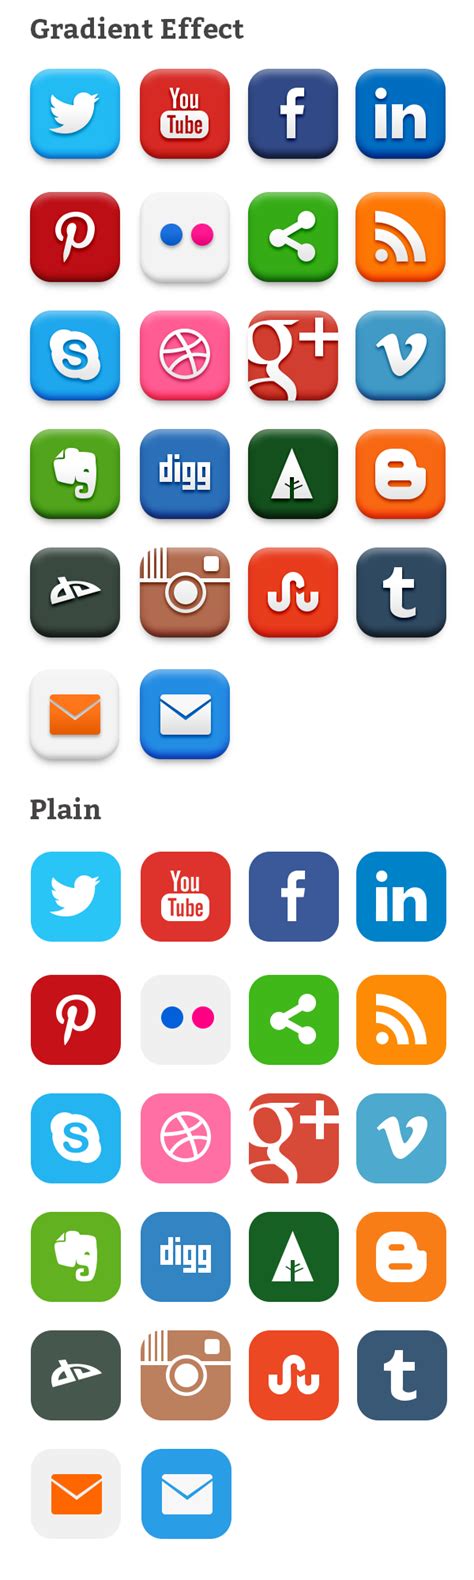 Country, category and leader board updated daily. 20 Popular Social Media Icons (PSD & PNG) - GraphicsFuel